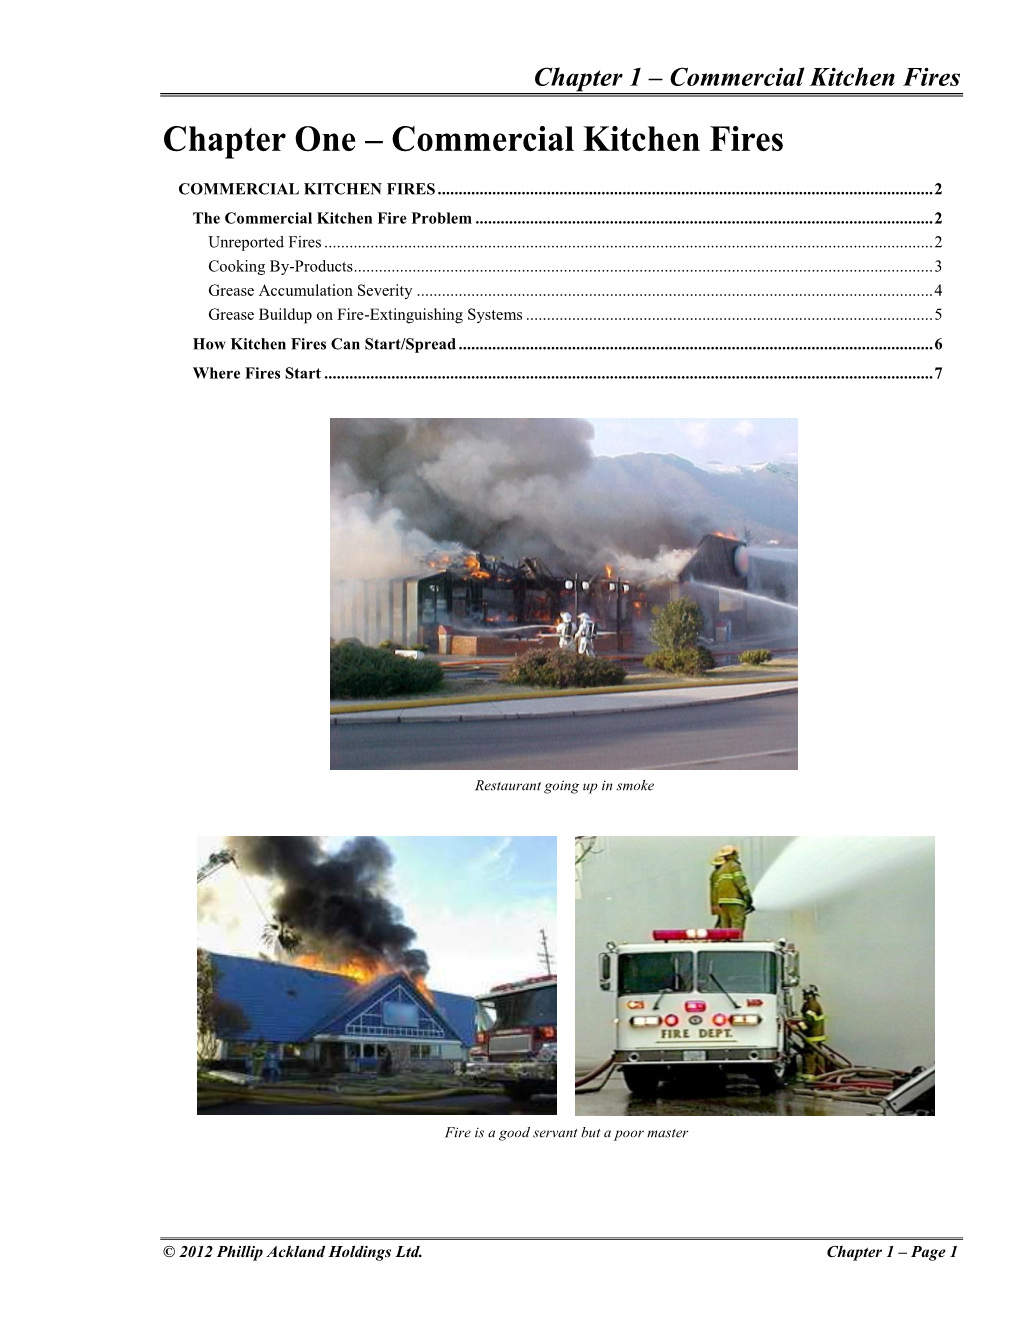 Chapter One – Commercial Kitchen Fires